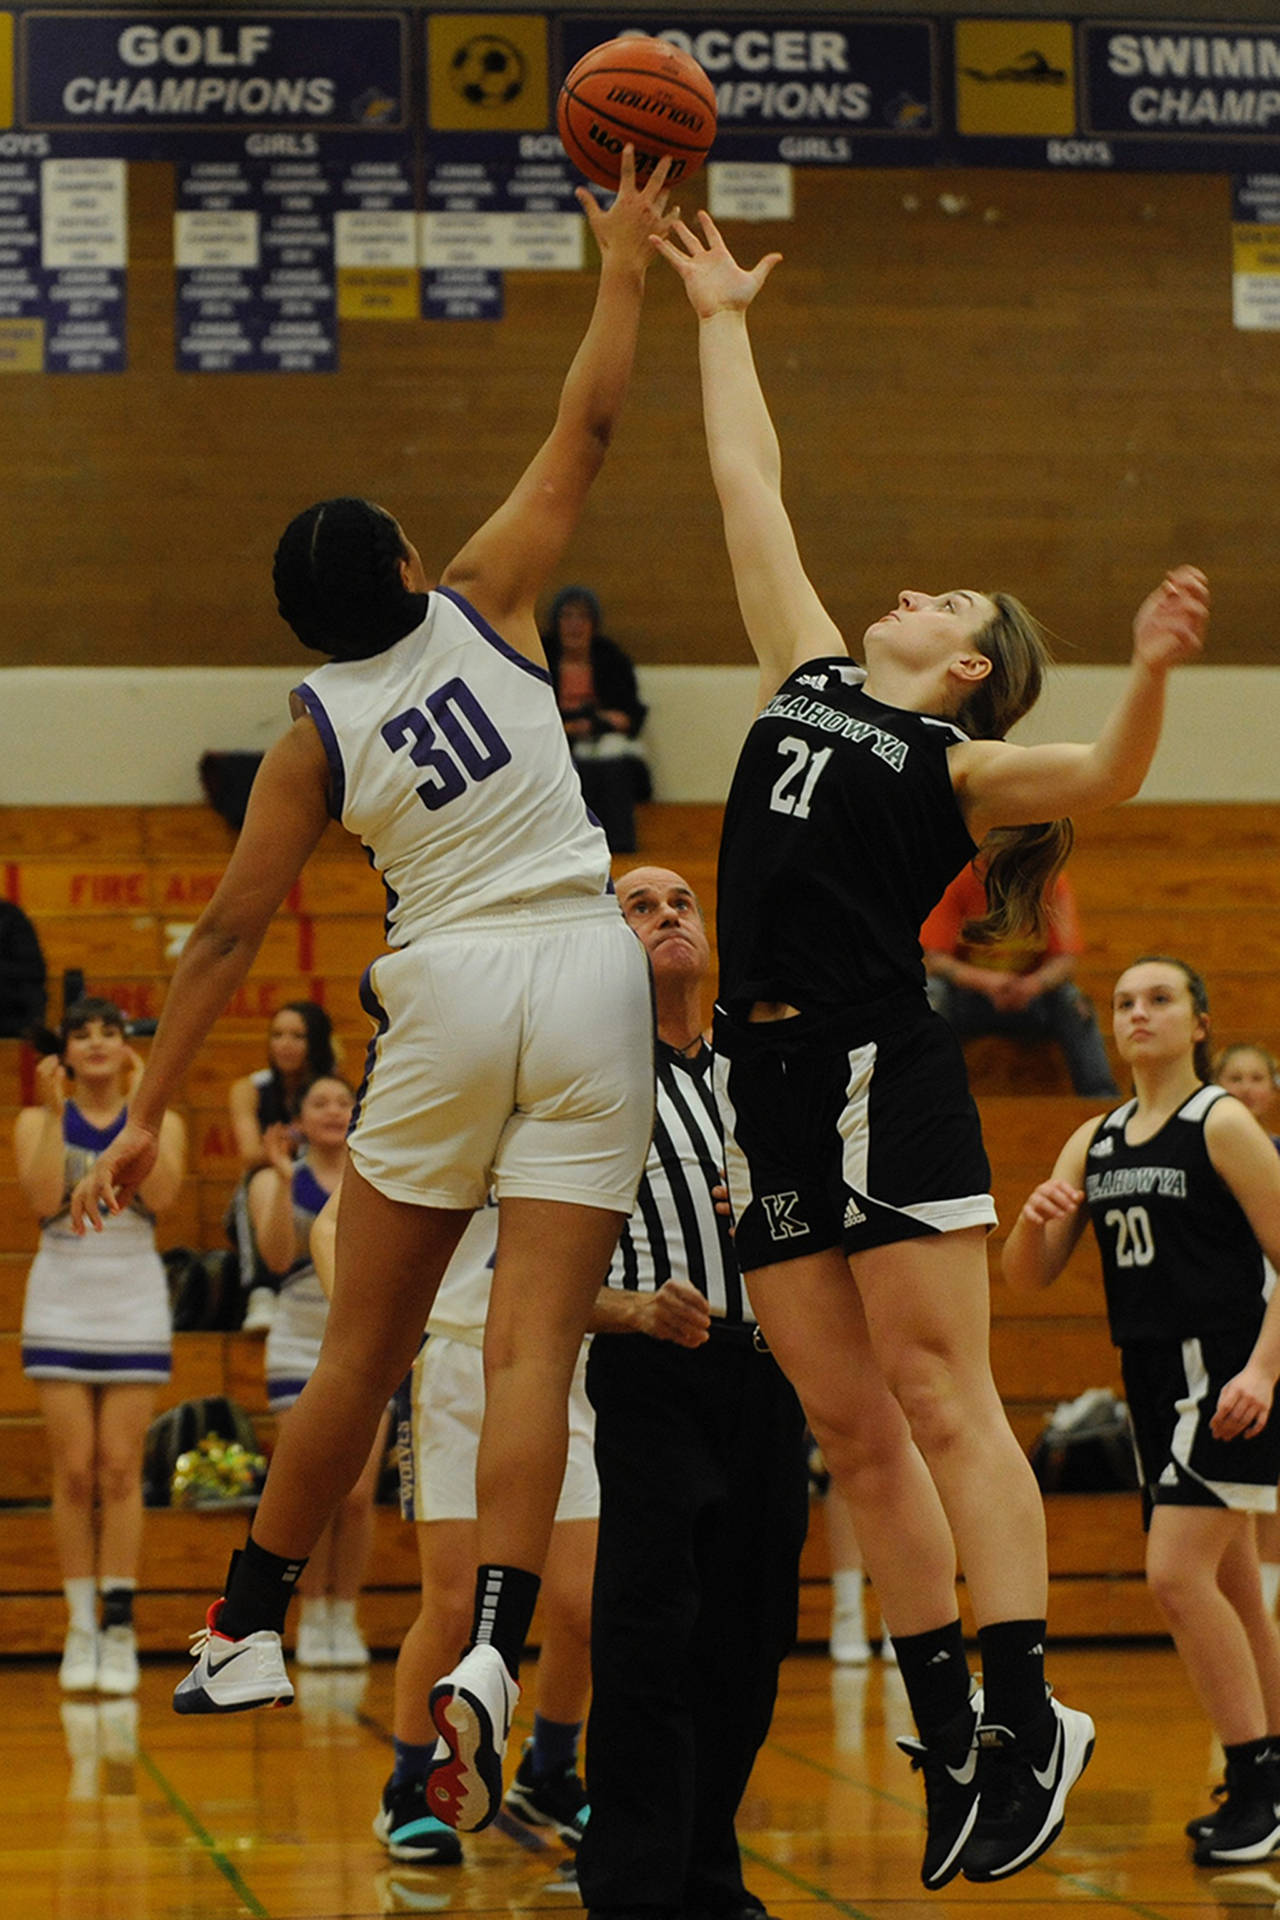 Sequim Wolves’ center Jayla Julmist, 30, wins the opening tipoff of the Wolves’ 73-17 win over the Klahowya Eagles on Dec. 2. Julmist earned a double-double on the night, leading the Wolves with 18 points and contributing 10 rebounds, along with five assists, two steals, and two blocks. Sequim Gazette photo by Conor Dowley